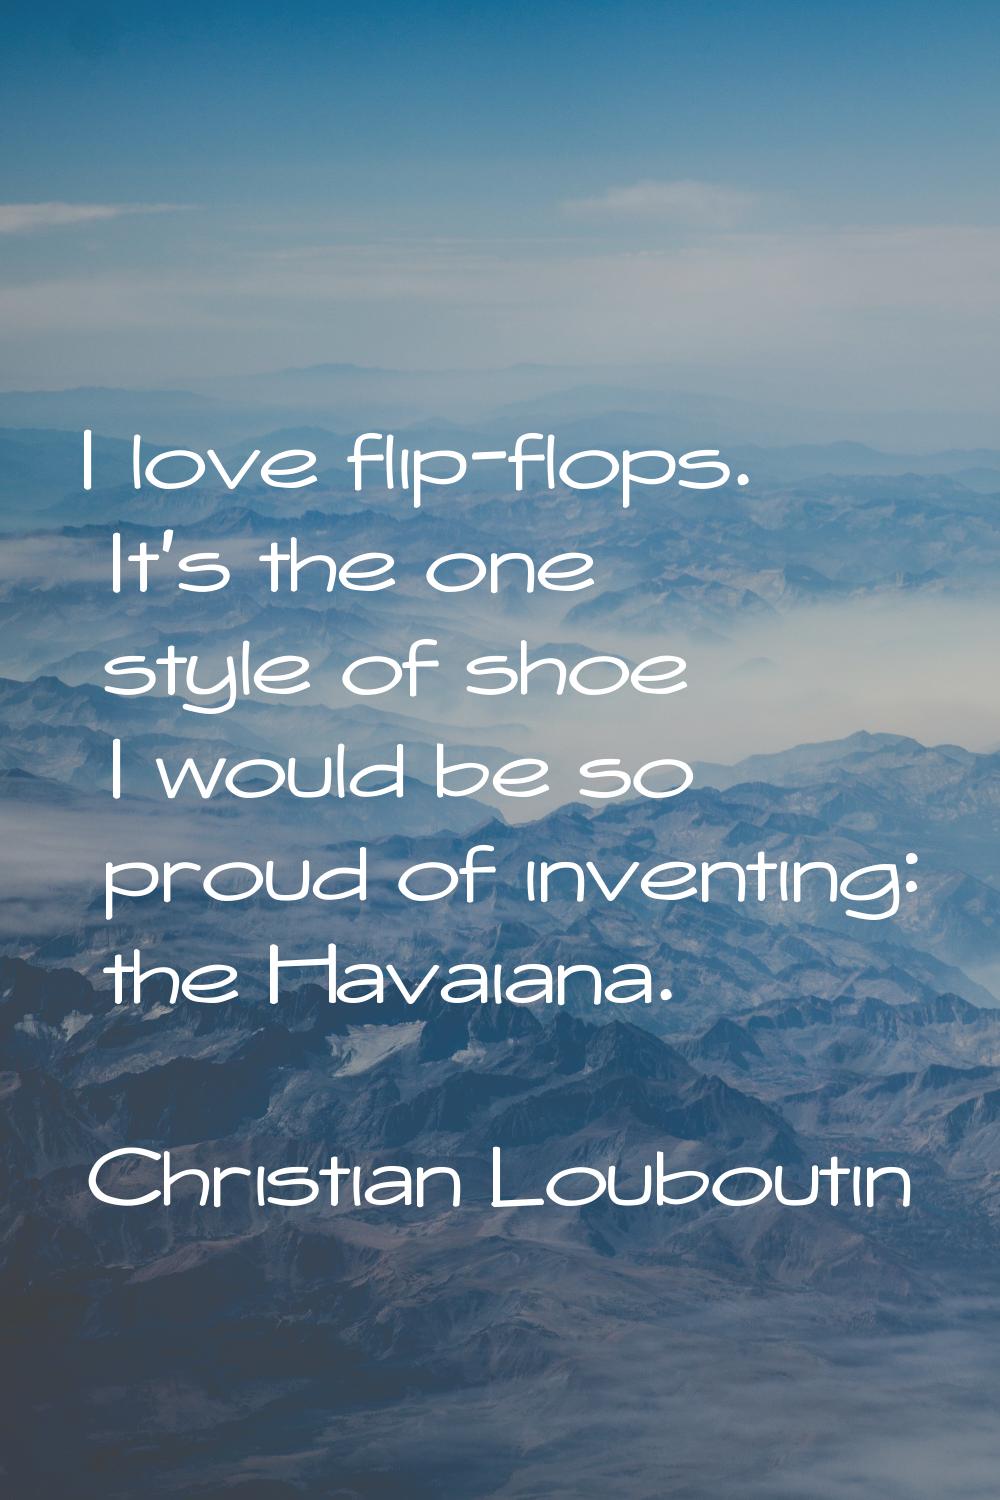 I love flip-flops. It's the one style of shoe I would be so proud of inventing: the Havaiana.